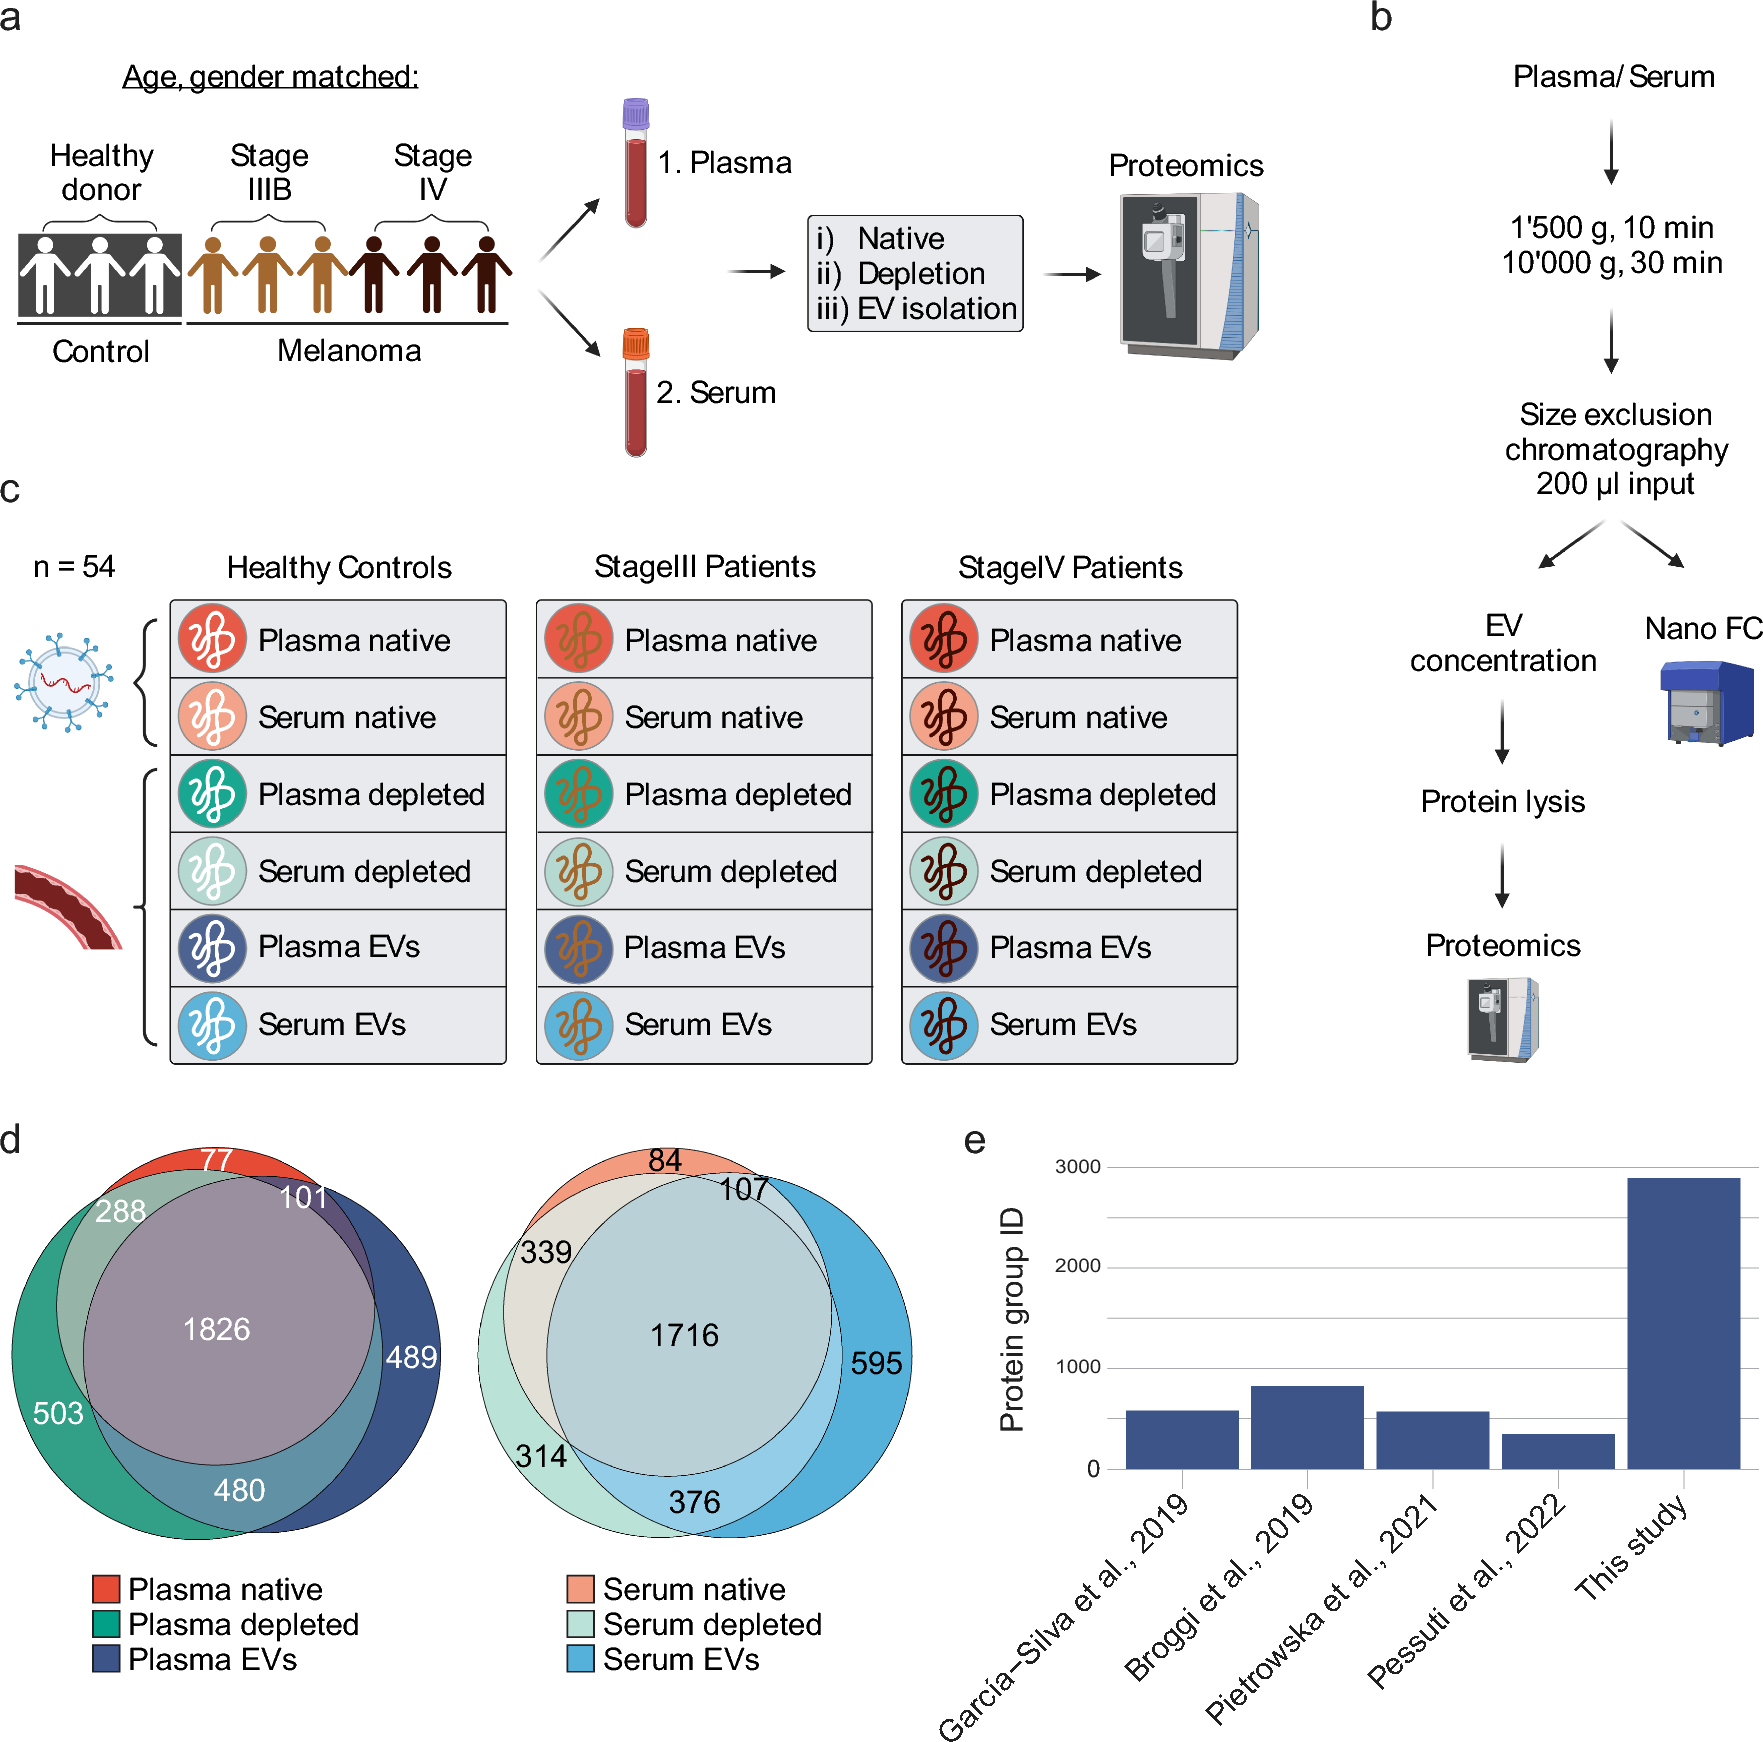 Size-exclusion chromatography combined with DIA-MS enables deep proteome profiling of extracellular vesicles from melanoma plasma and serum